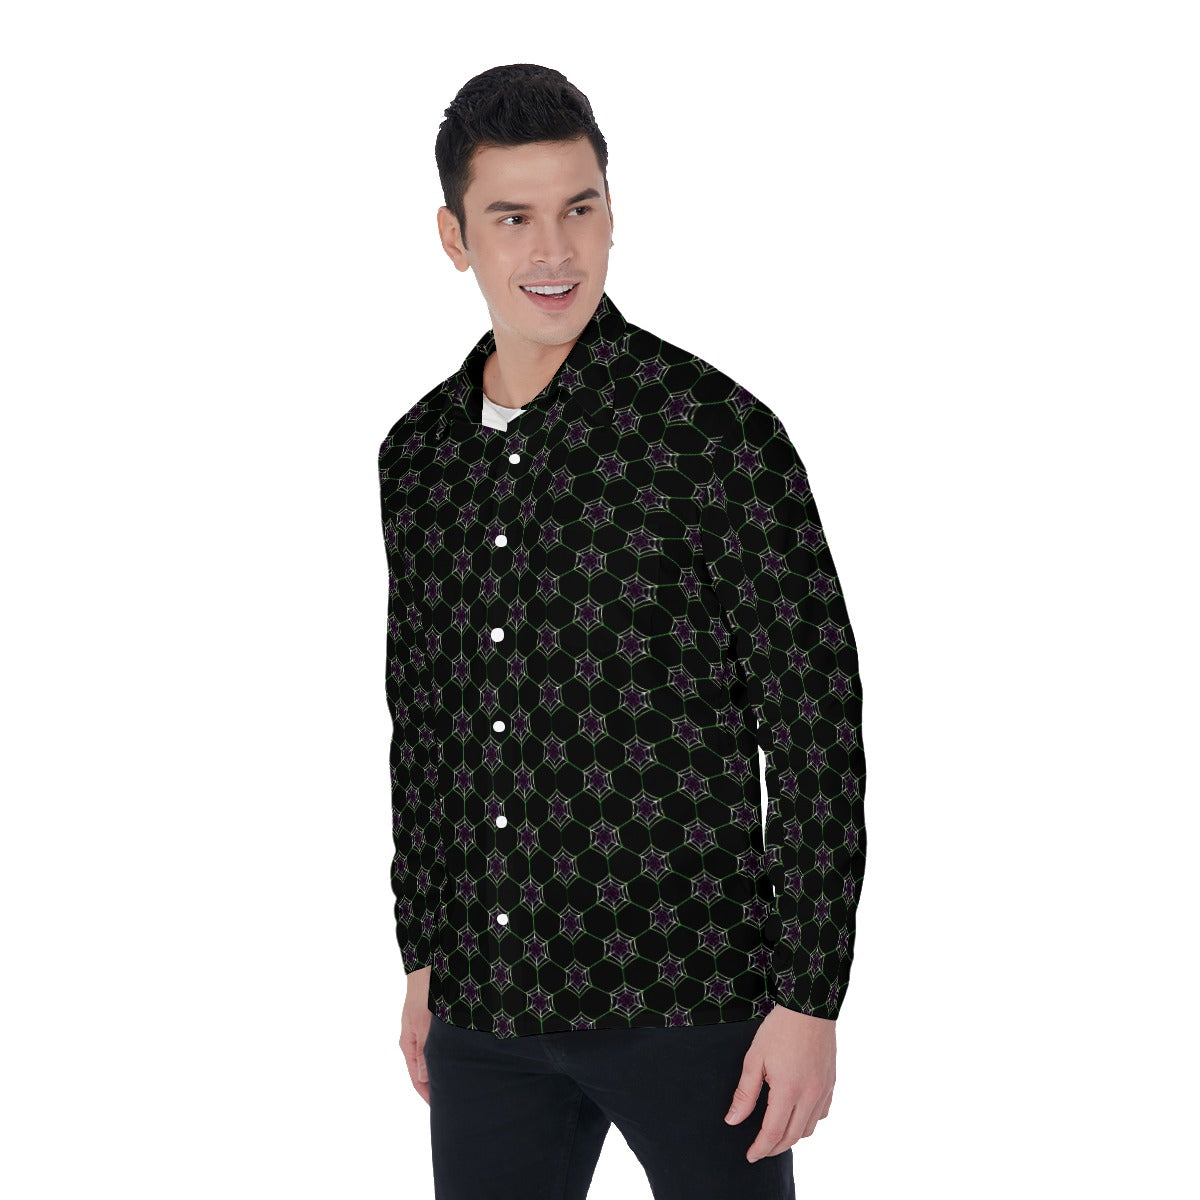 Geometric Spiderweb Pattern 4-Way Stretch Long Sleeve Shirt with Collar | Relaxed Fit | Choose Your Colourway